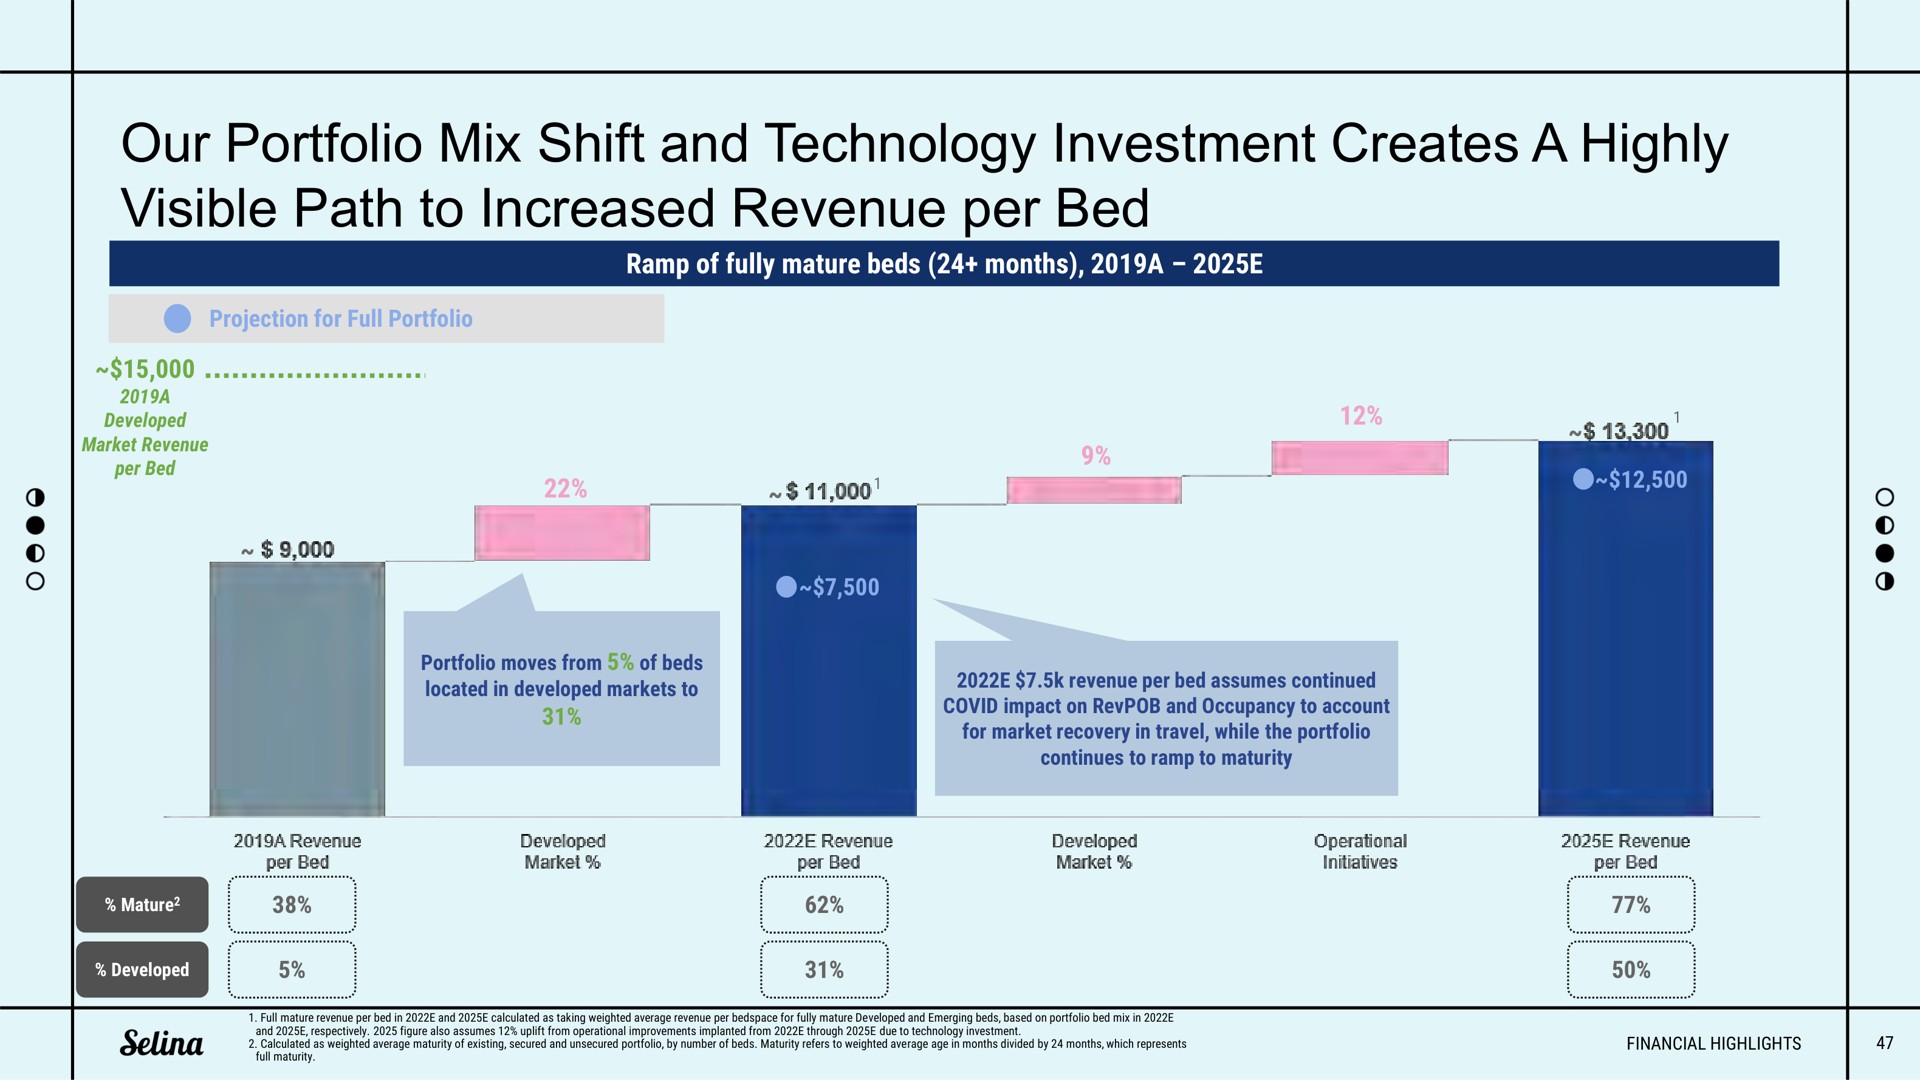 our portfolio mix shift and technology investment creates a highly visible path to increased revenue per bed | Selina